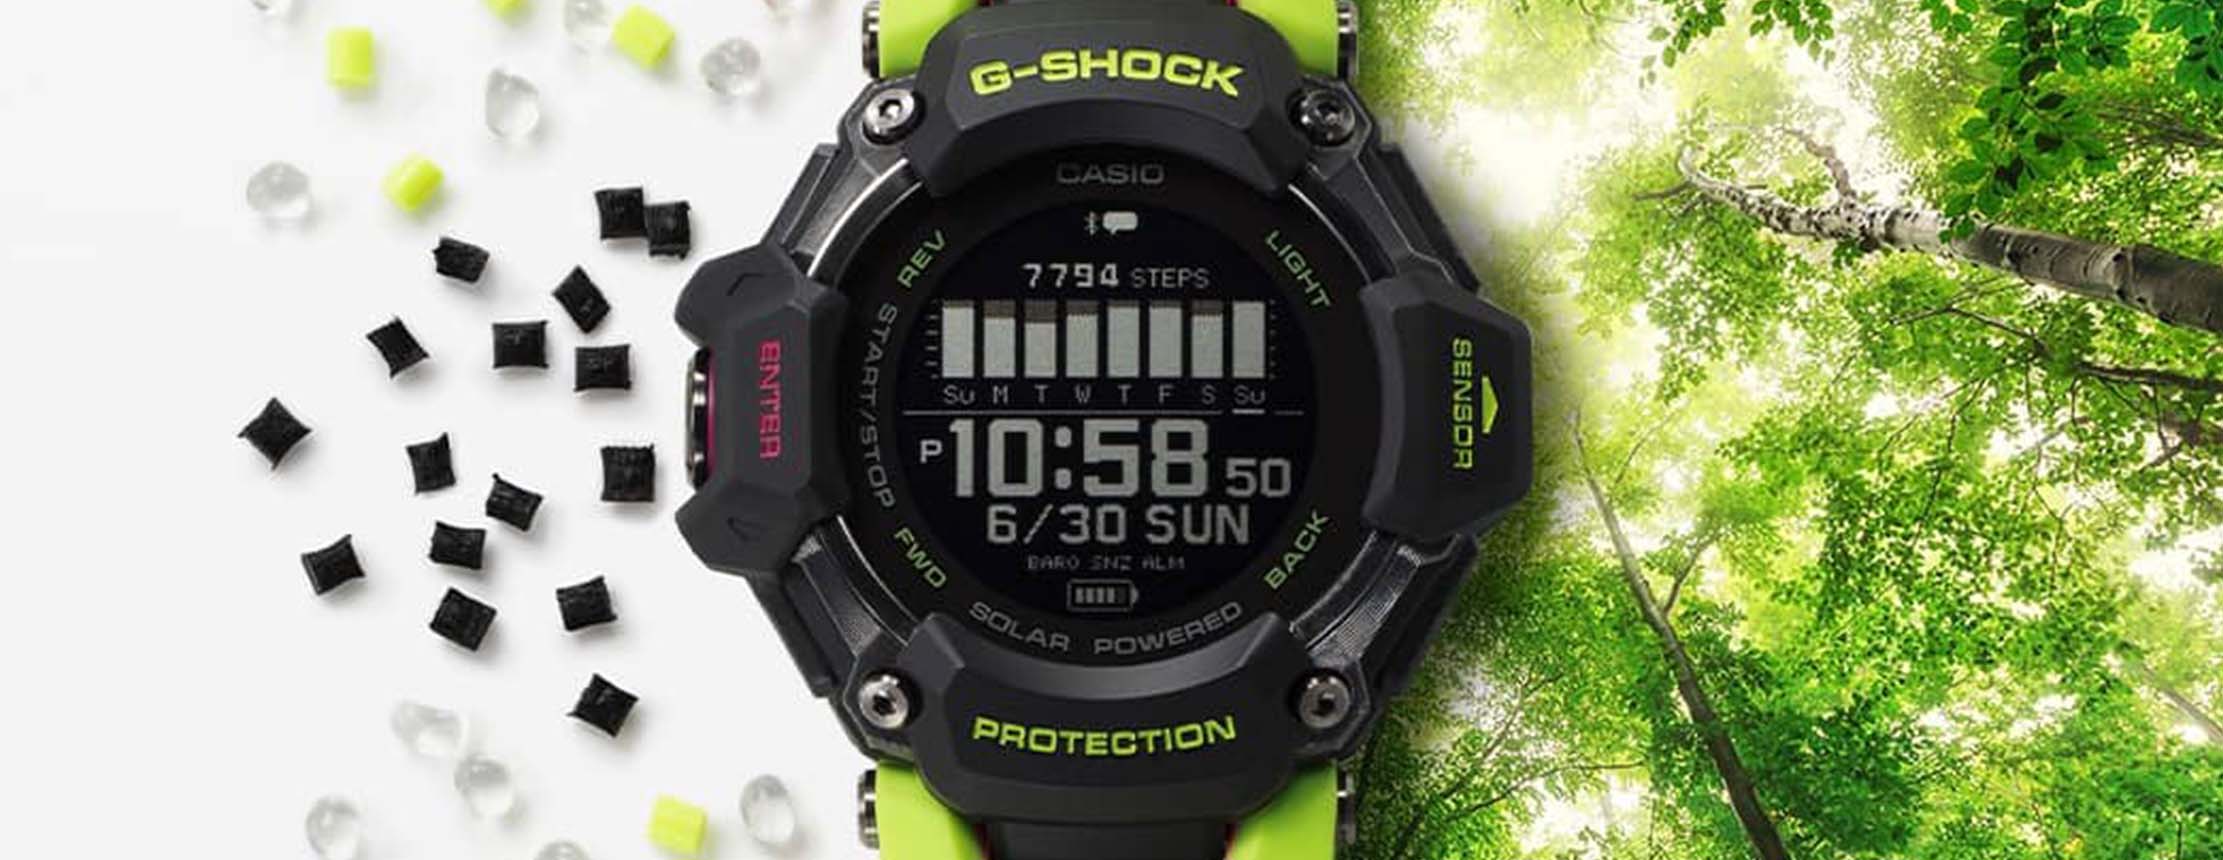 Casio to release lightweight g-shock delivering support for multiple sports